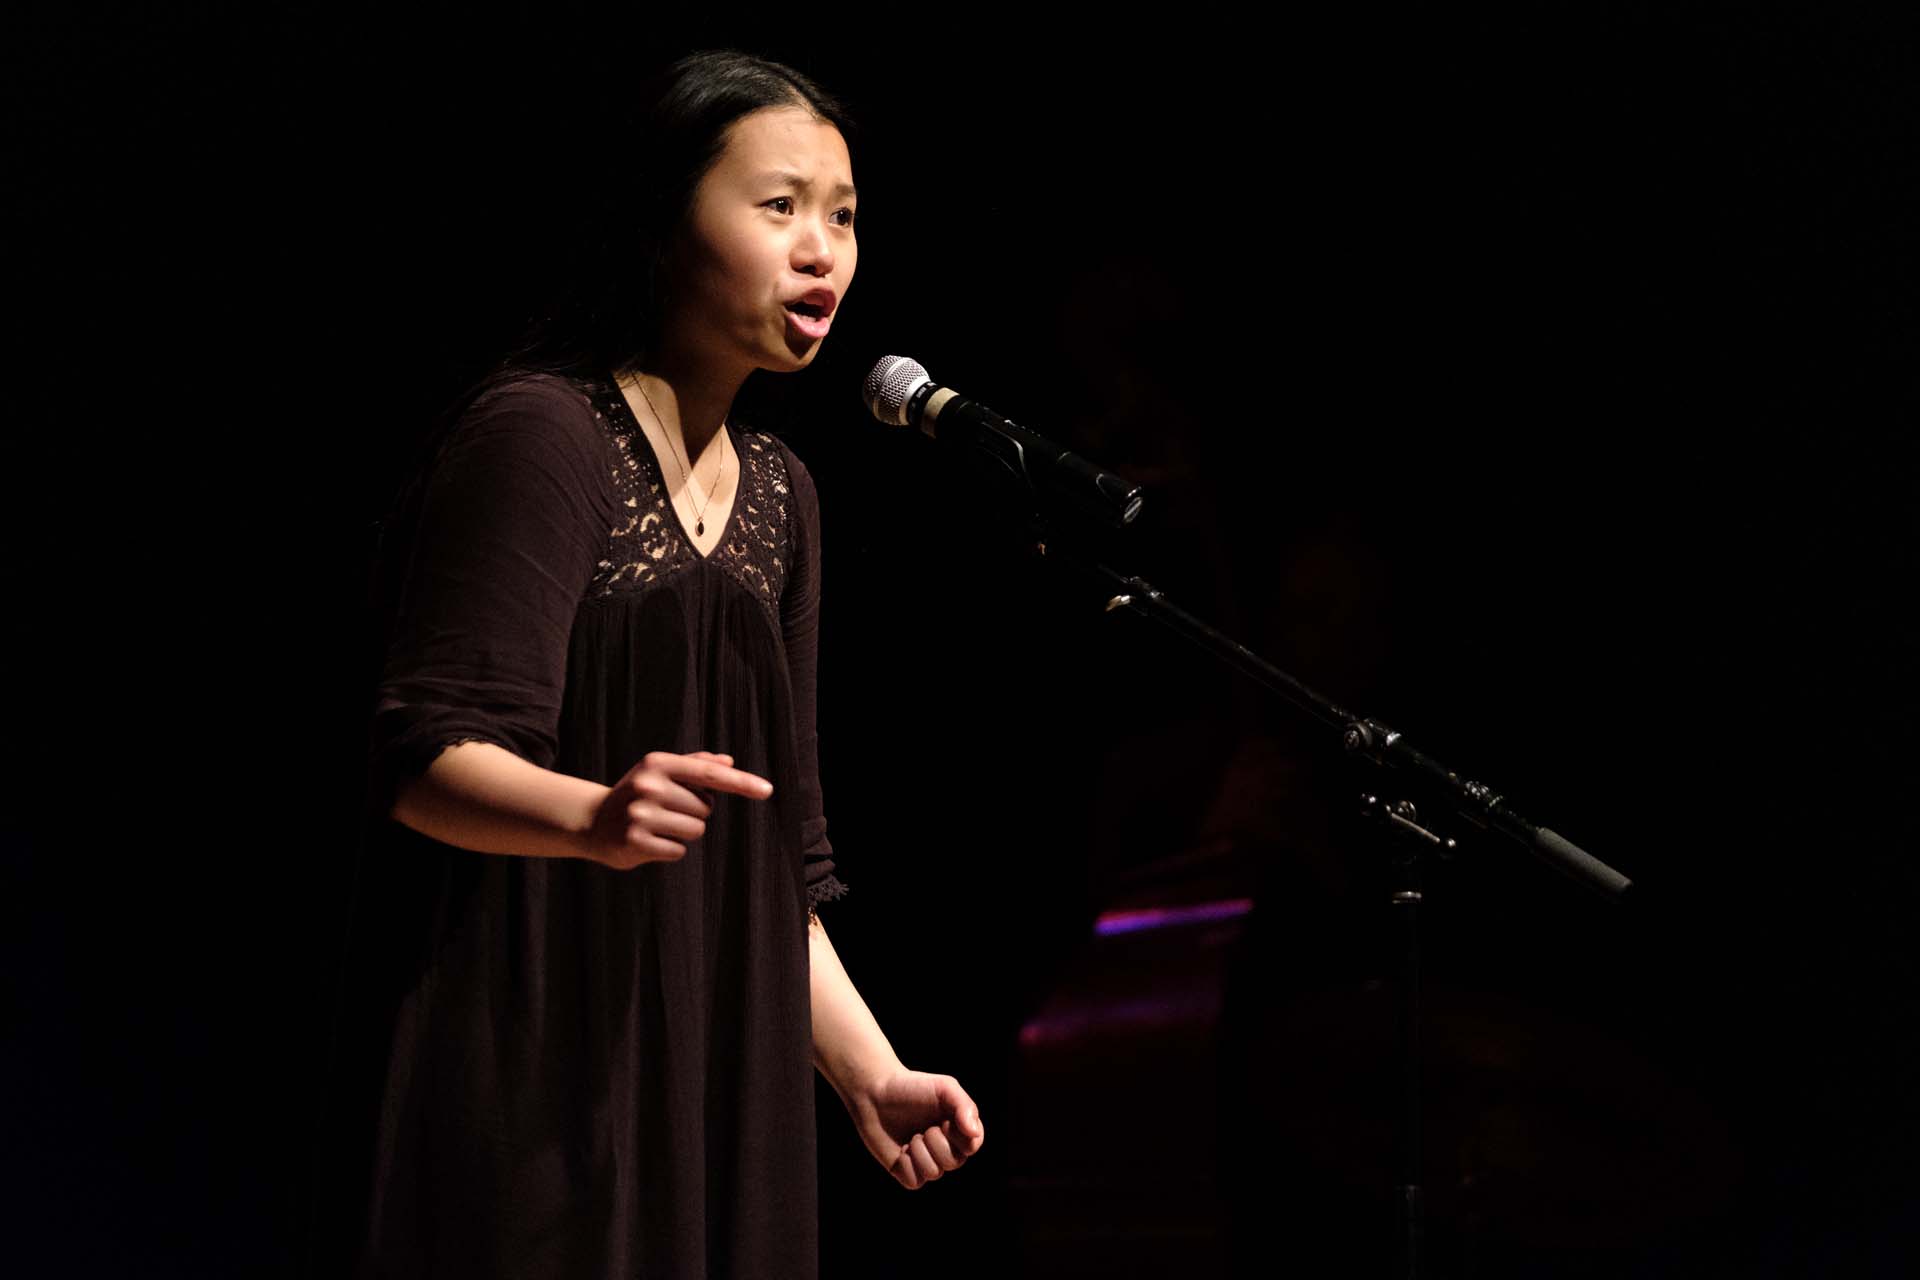 Nina Thach recites “My Brother at 3 A.M.” by Natalie Diaz.